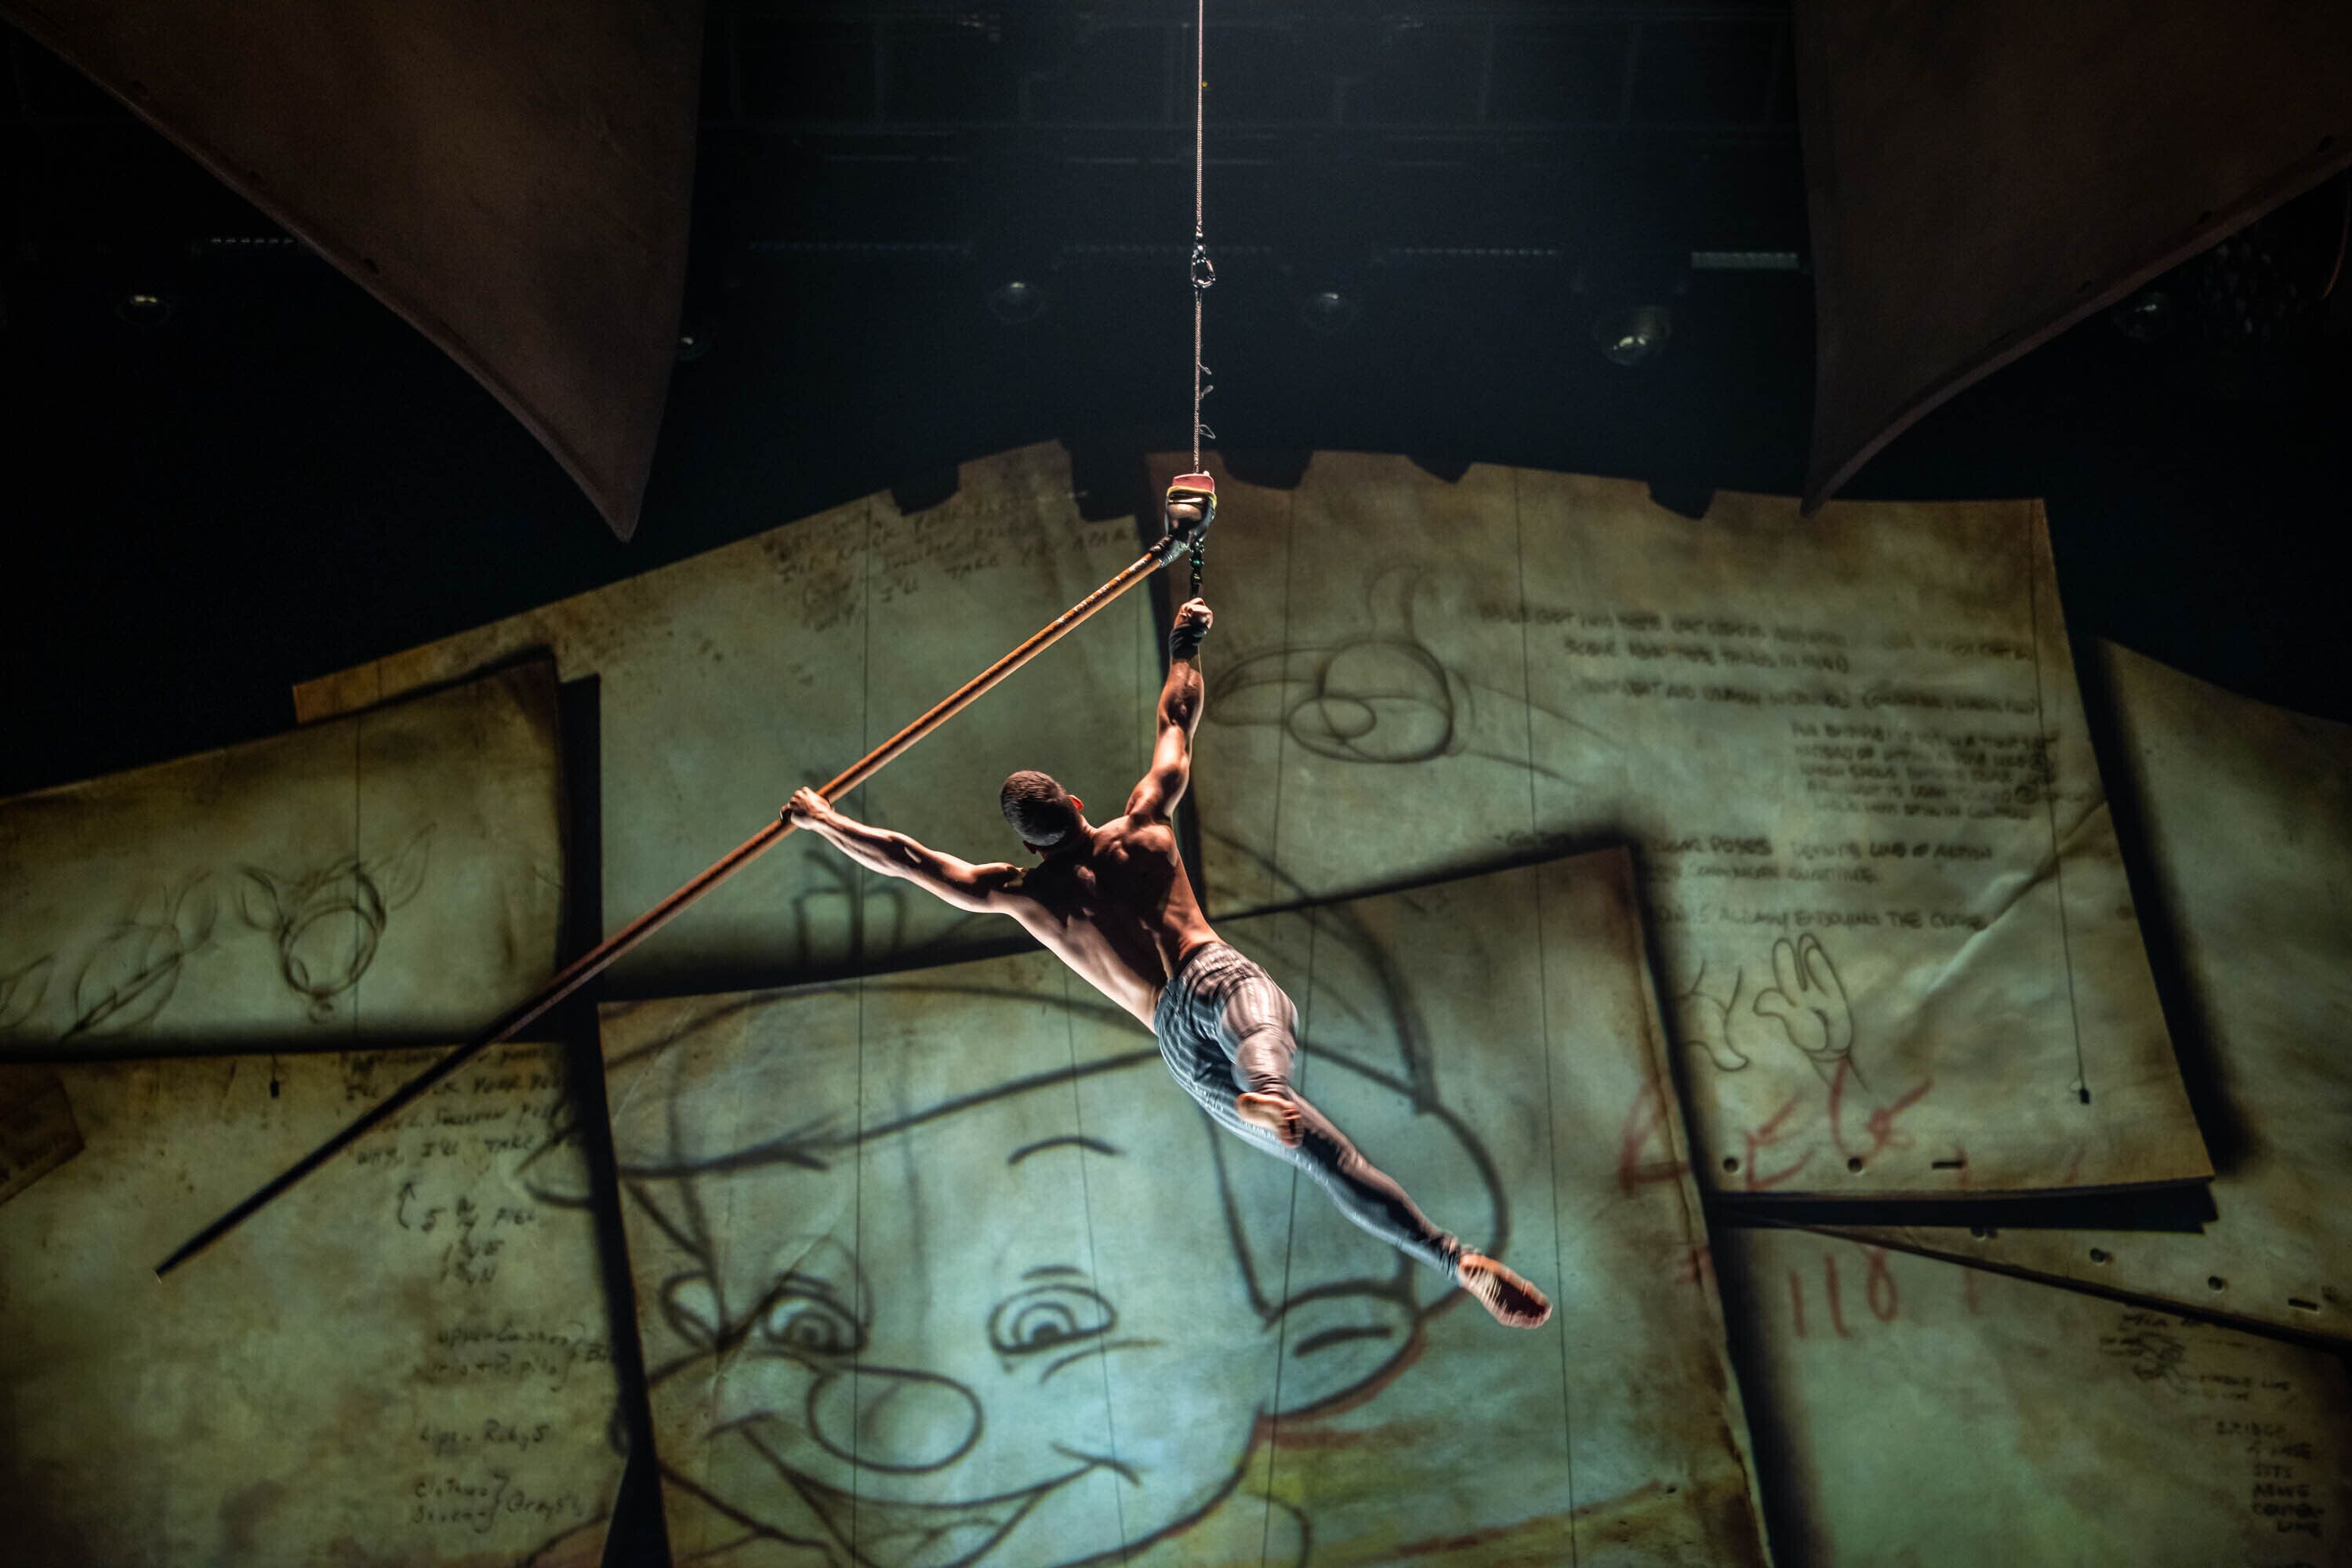 drawn to life presented by cirque du soleil